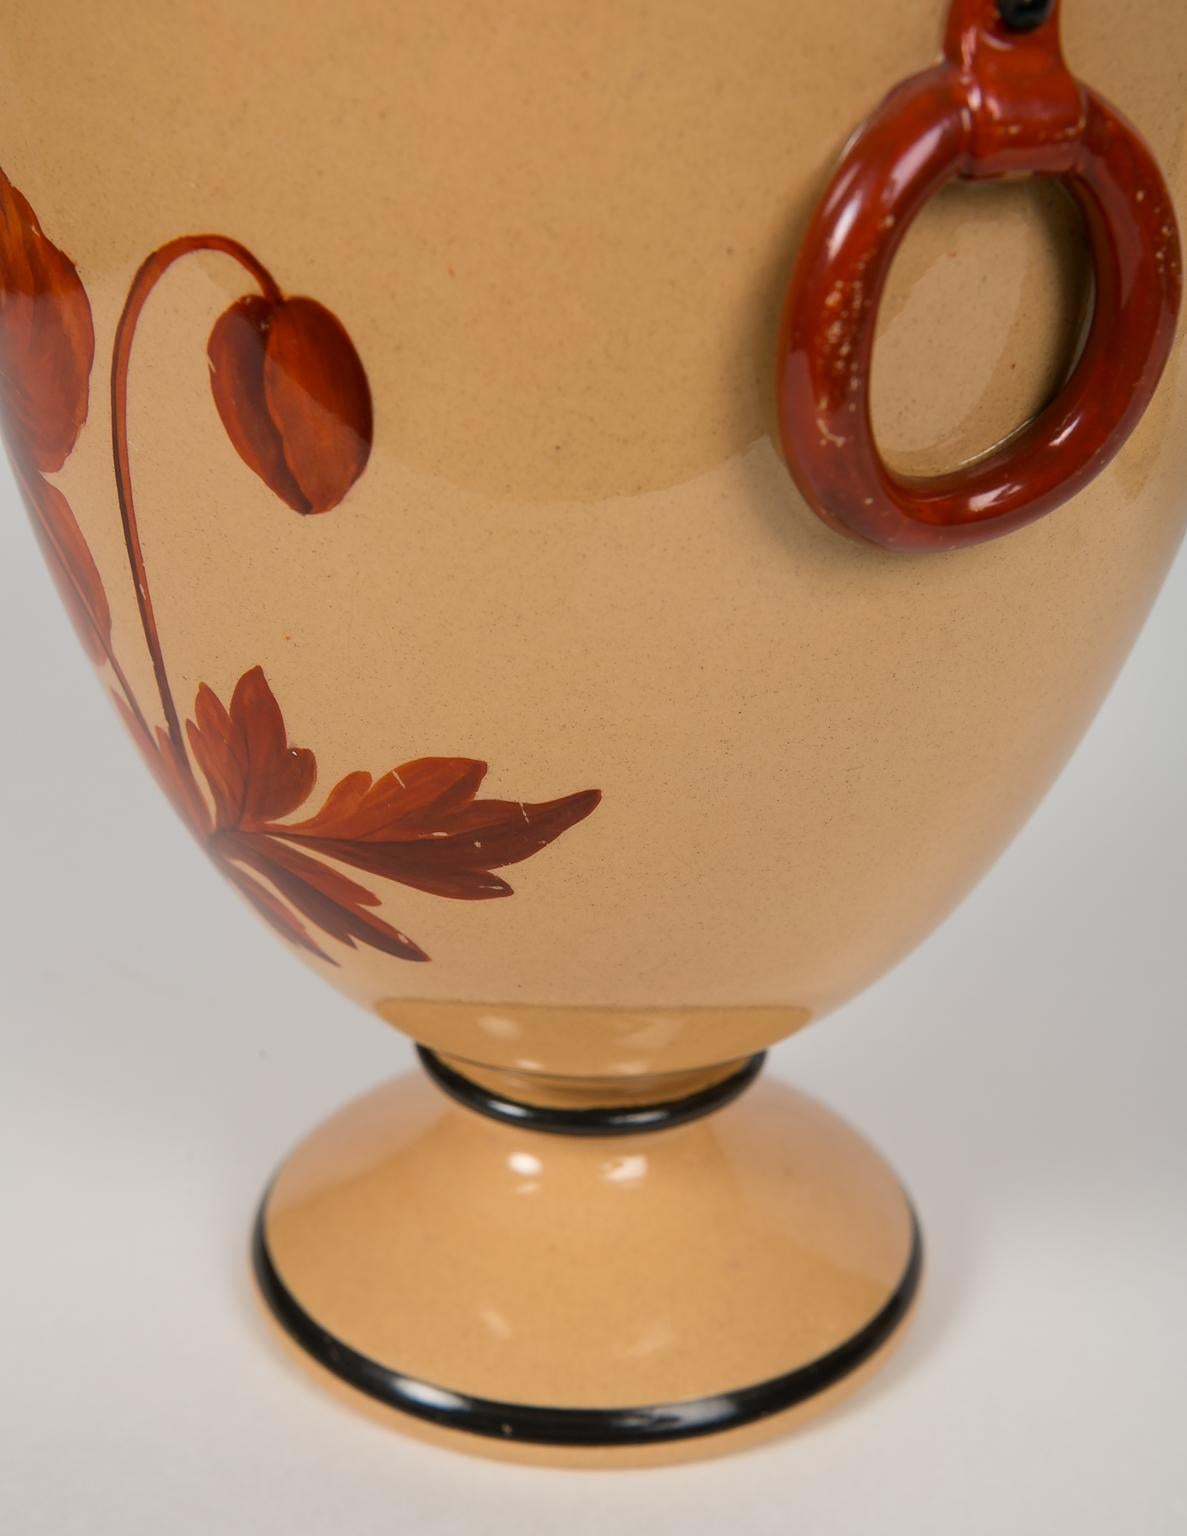 Vases with Large Red Flowers and Greek Key Decoration 1